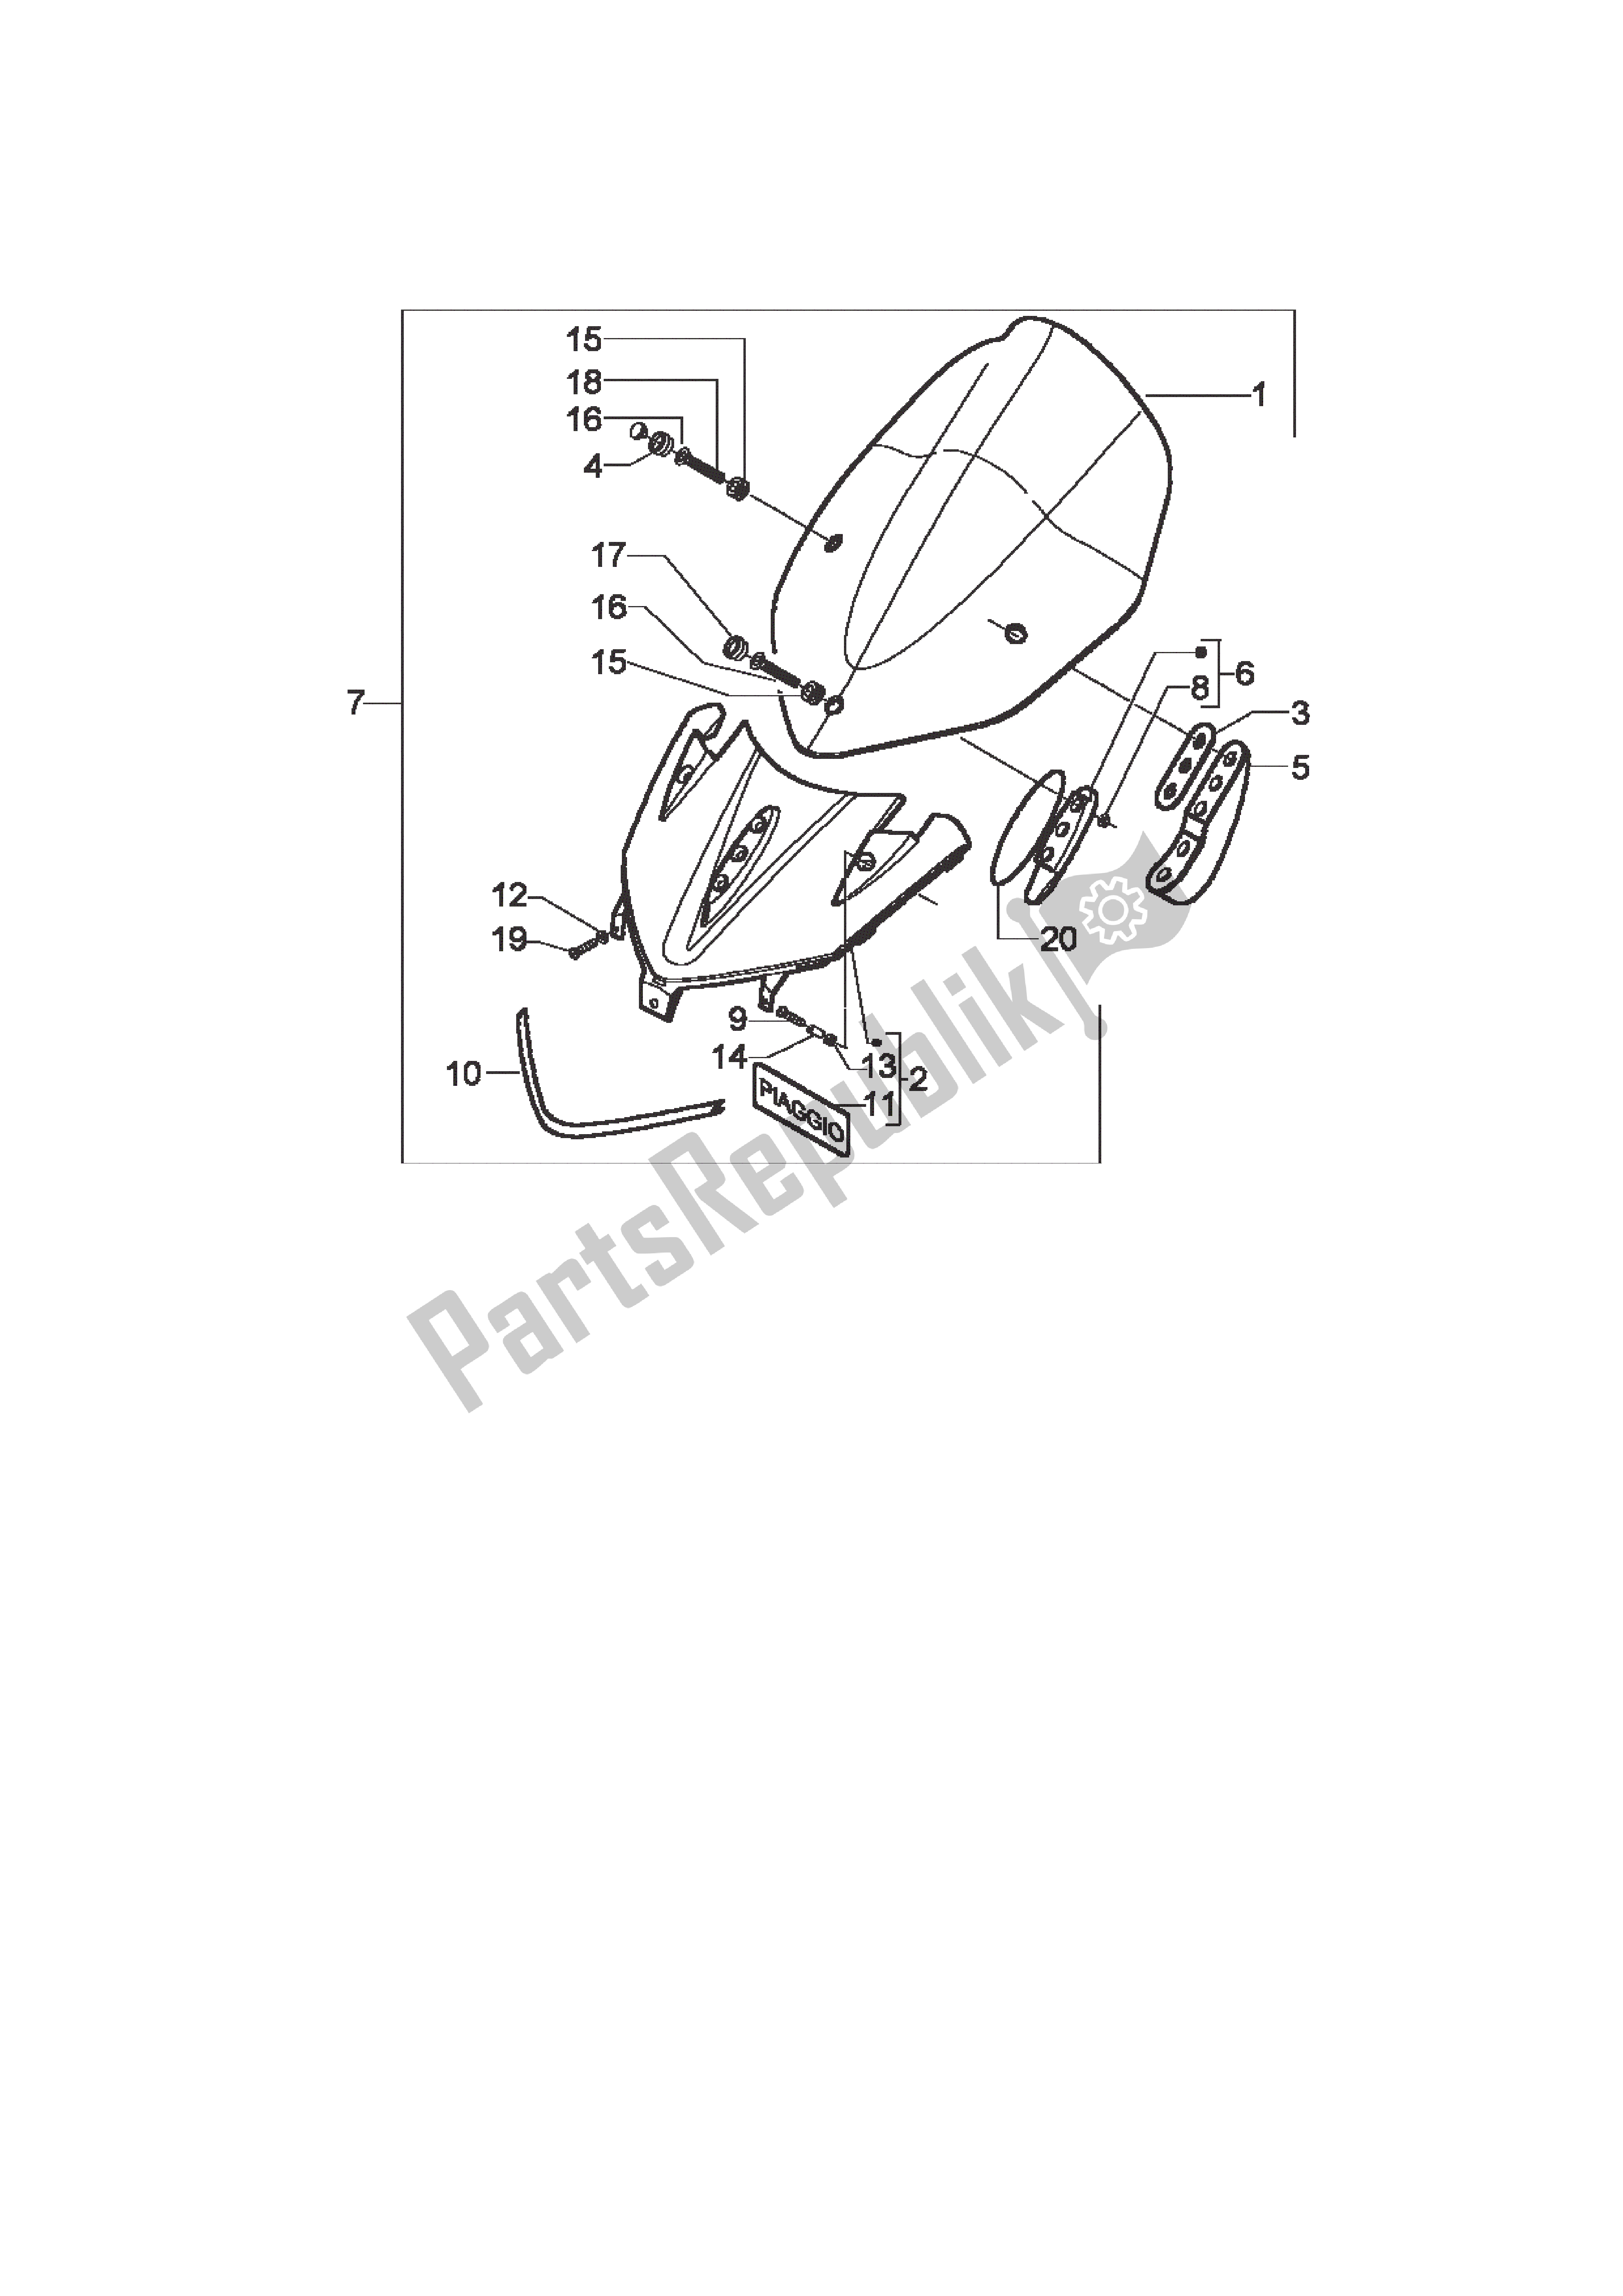 All parts for the Windscreen of the Piaggio X9 500 2003 - 2004